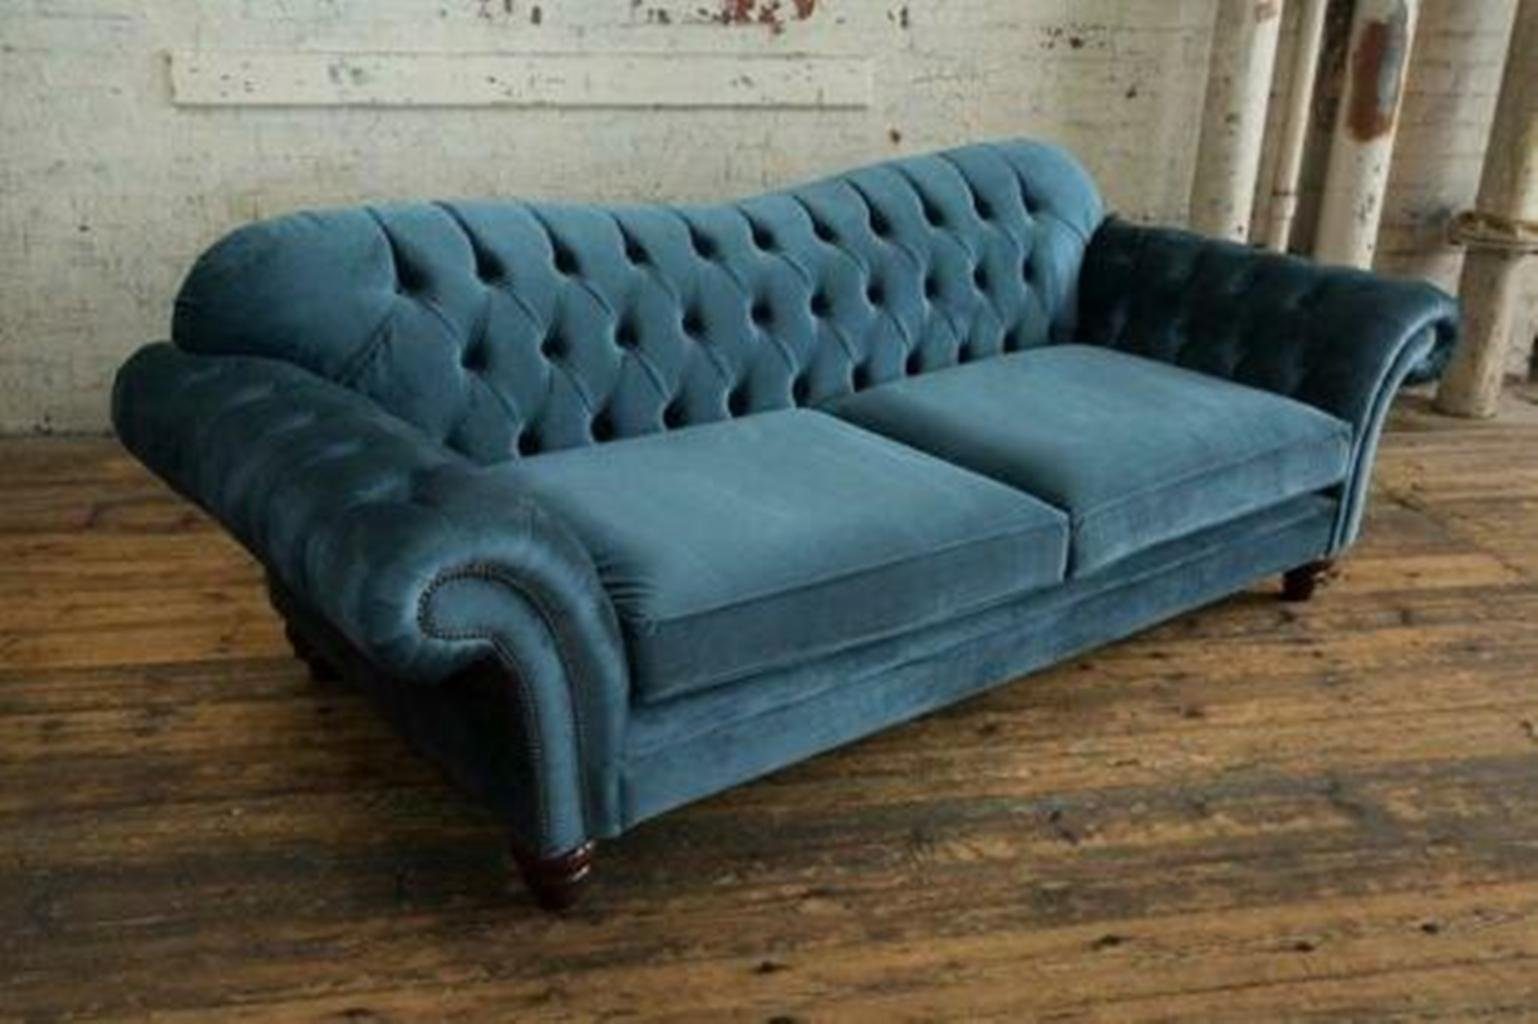 JVmoebel Luxus Sofas Textil Chesterfield Couch Sofa Chesterfield-Sofa,